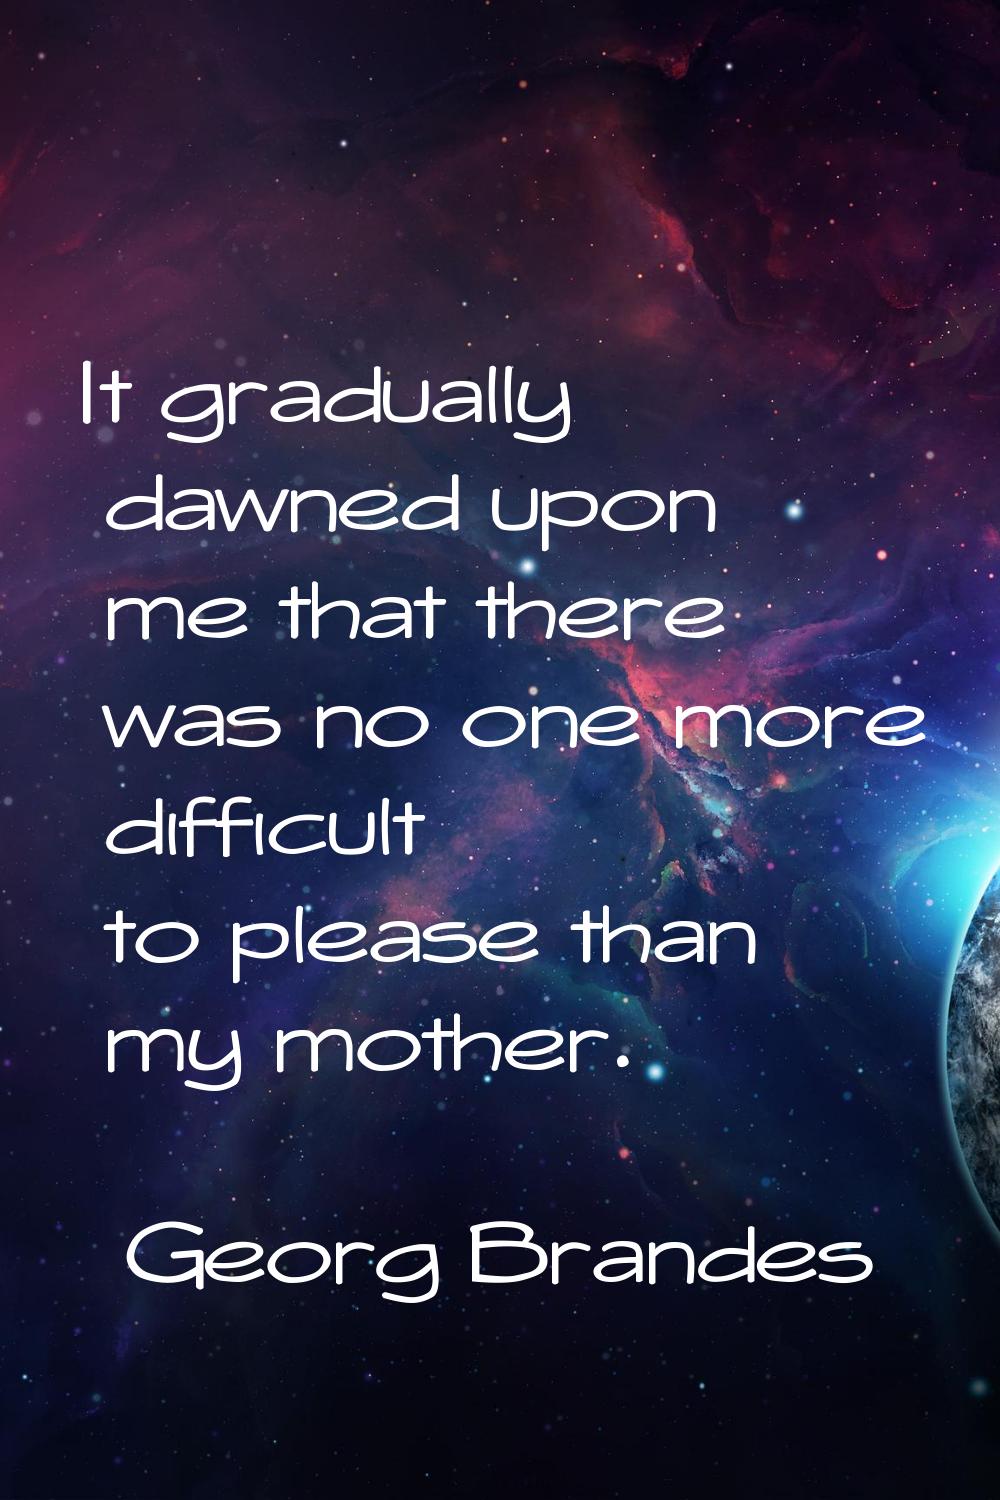 It gradually dawned upon me that there was no one more difficult to please than my mother.